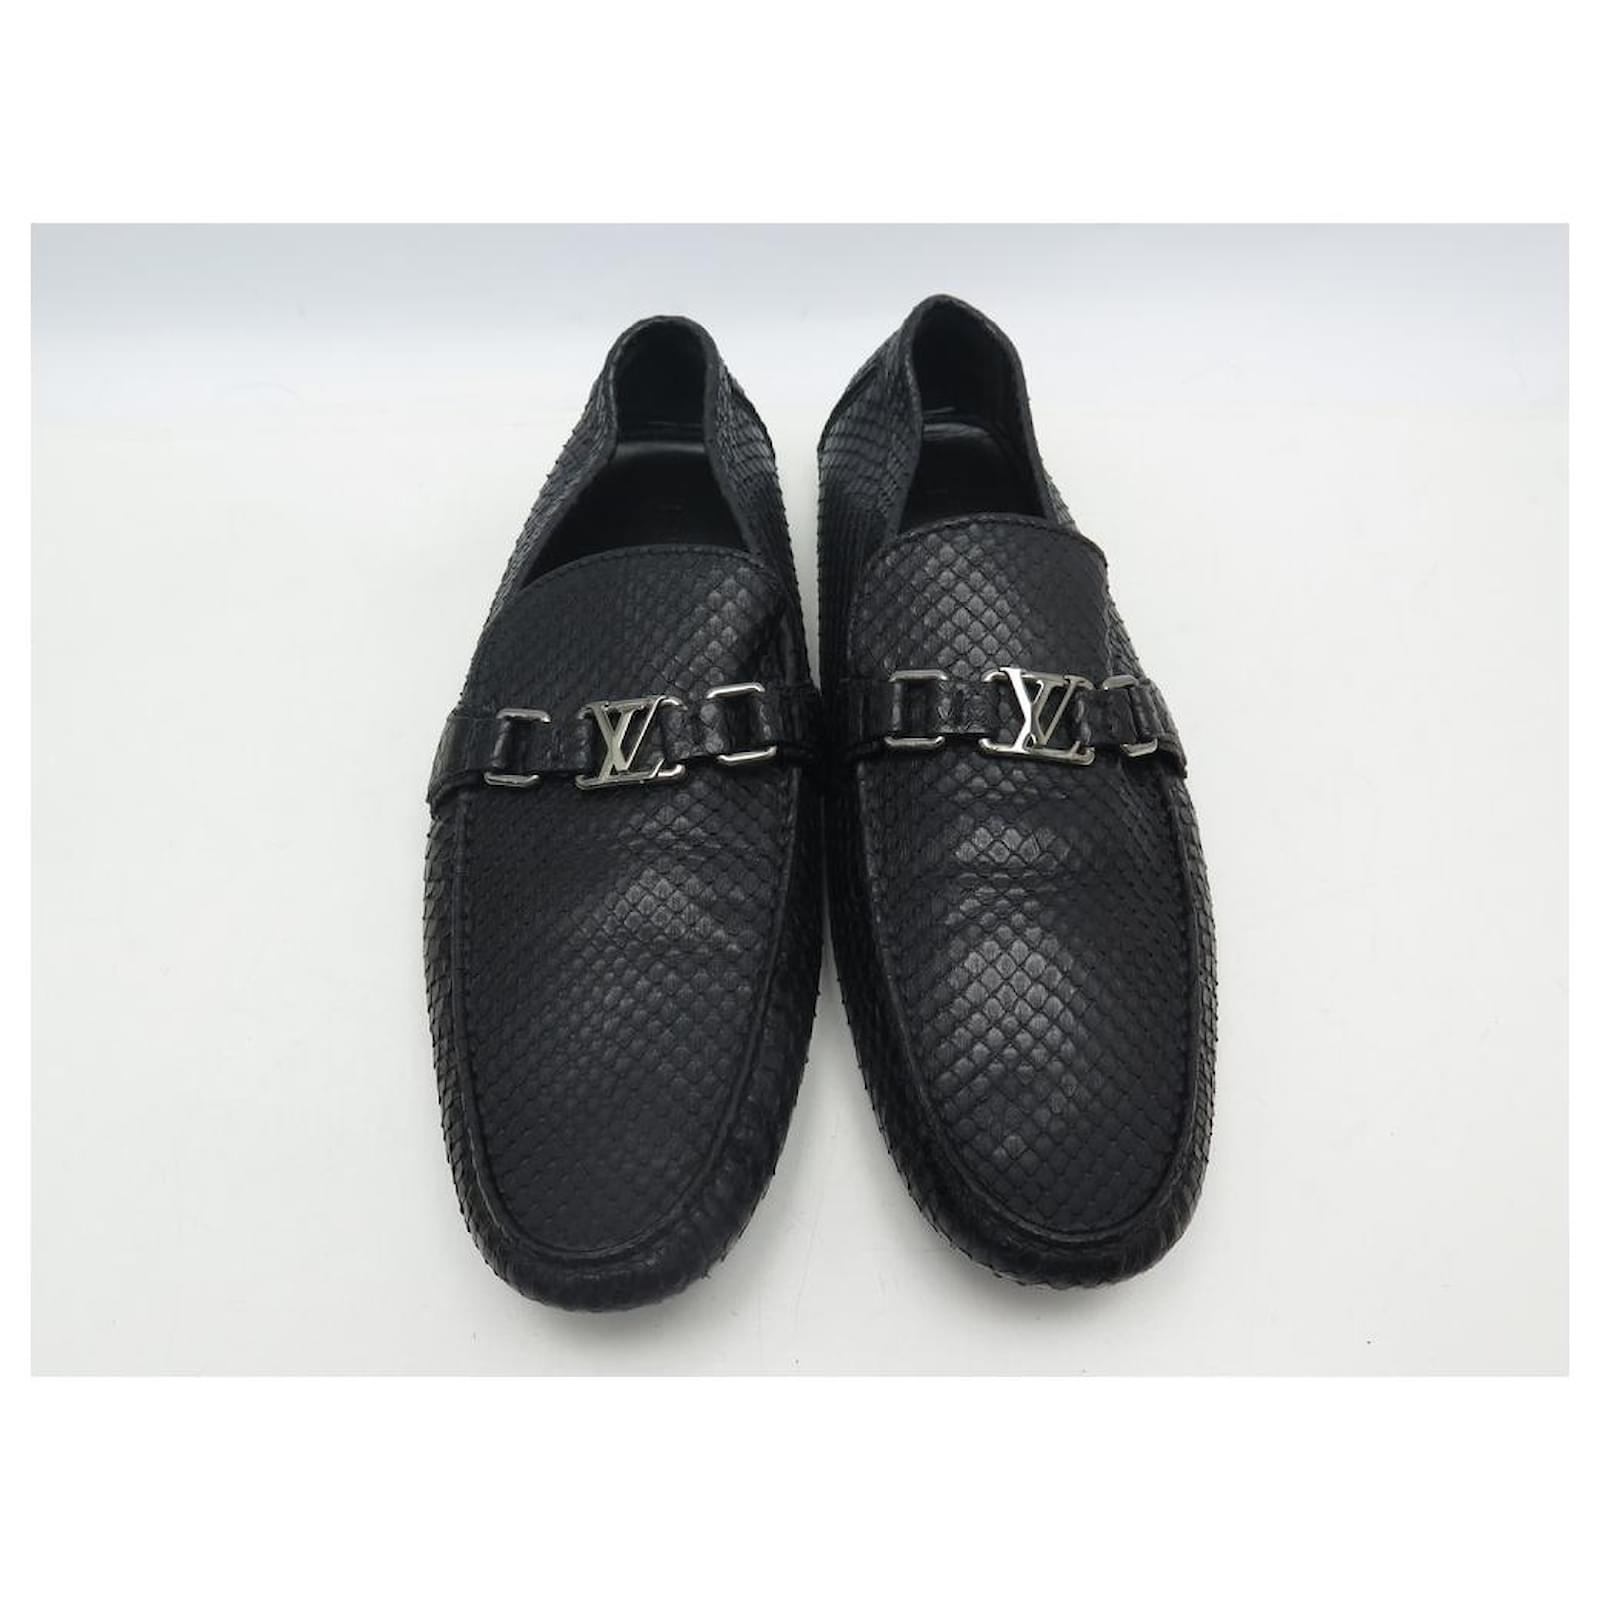 Louis Vuitton Black Suede Leather Monte Carlo Slip on Loafers Size 46